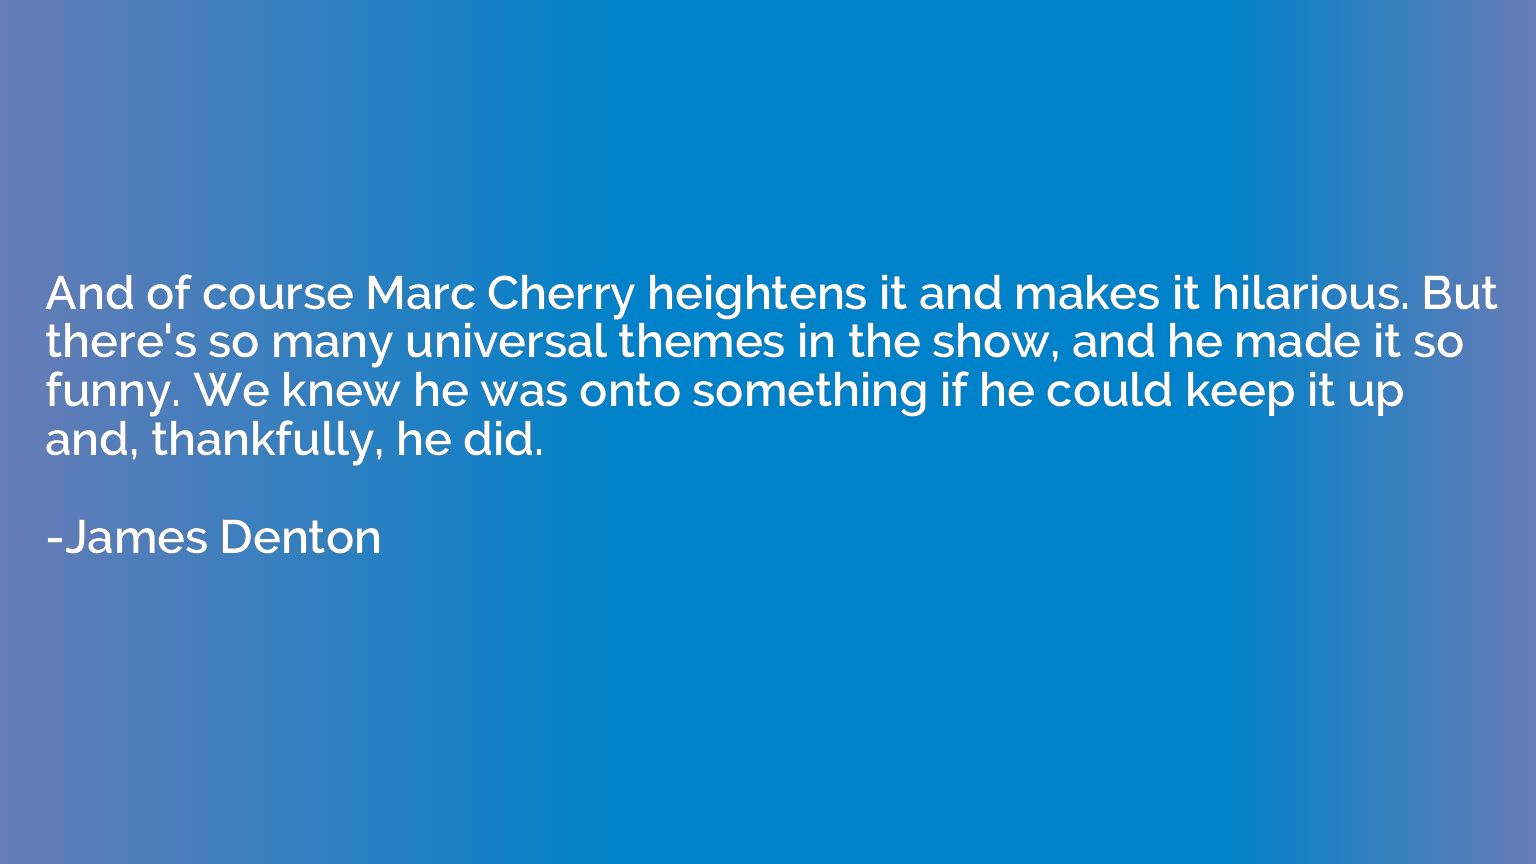 And of course Marc Cherry heightens it and makes it hilariou